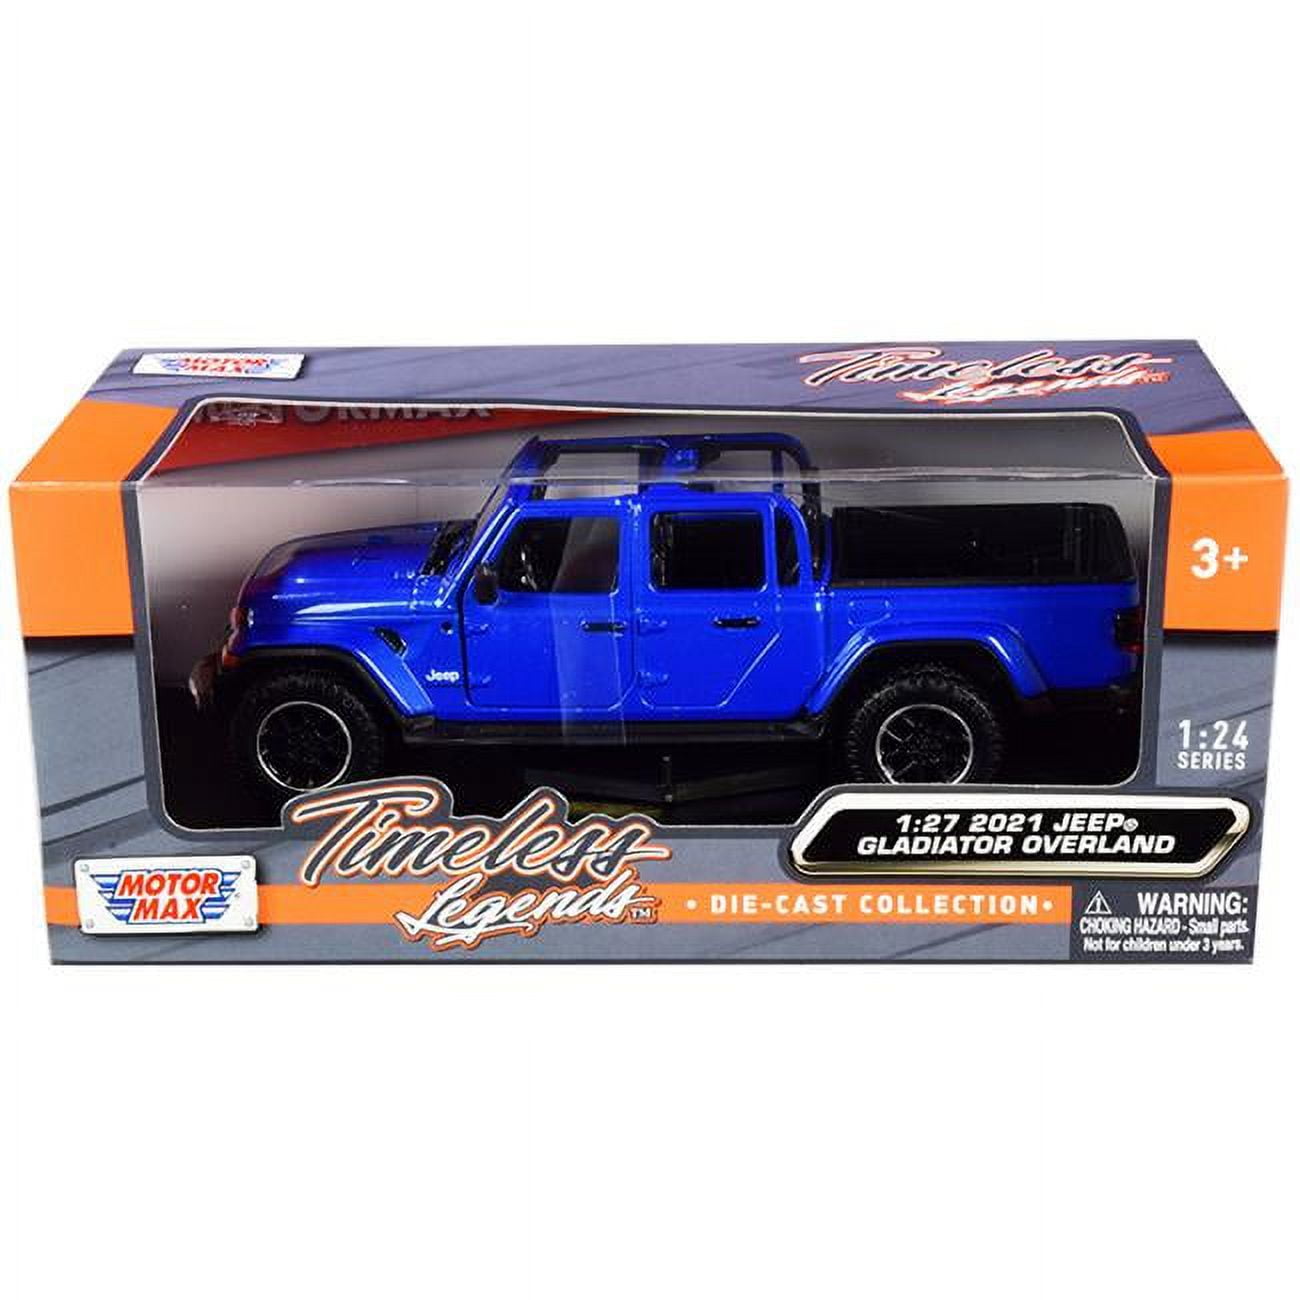 Picture of Motormax 79367bl 1-24 & 1-27 Diecast Model Car for 2021 Jeep Gladiator Overland Open Top Pickup Truck&#44; Blue Metallic